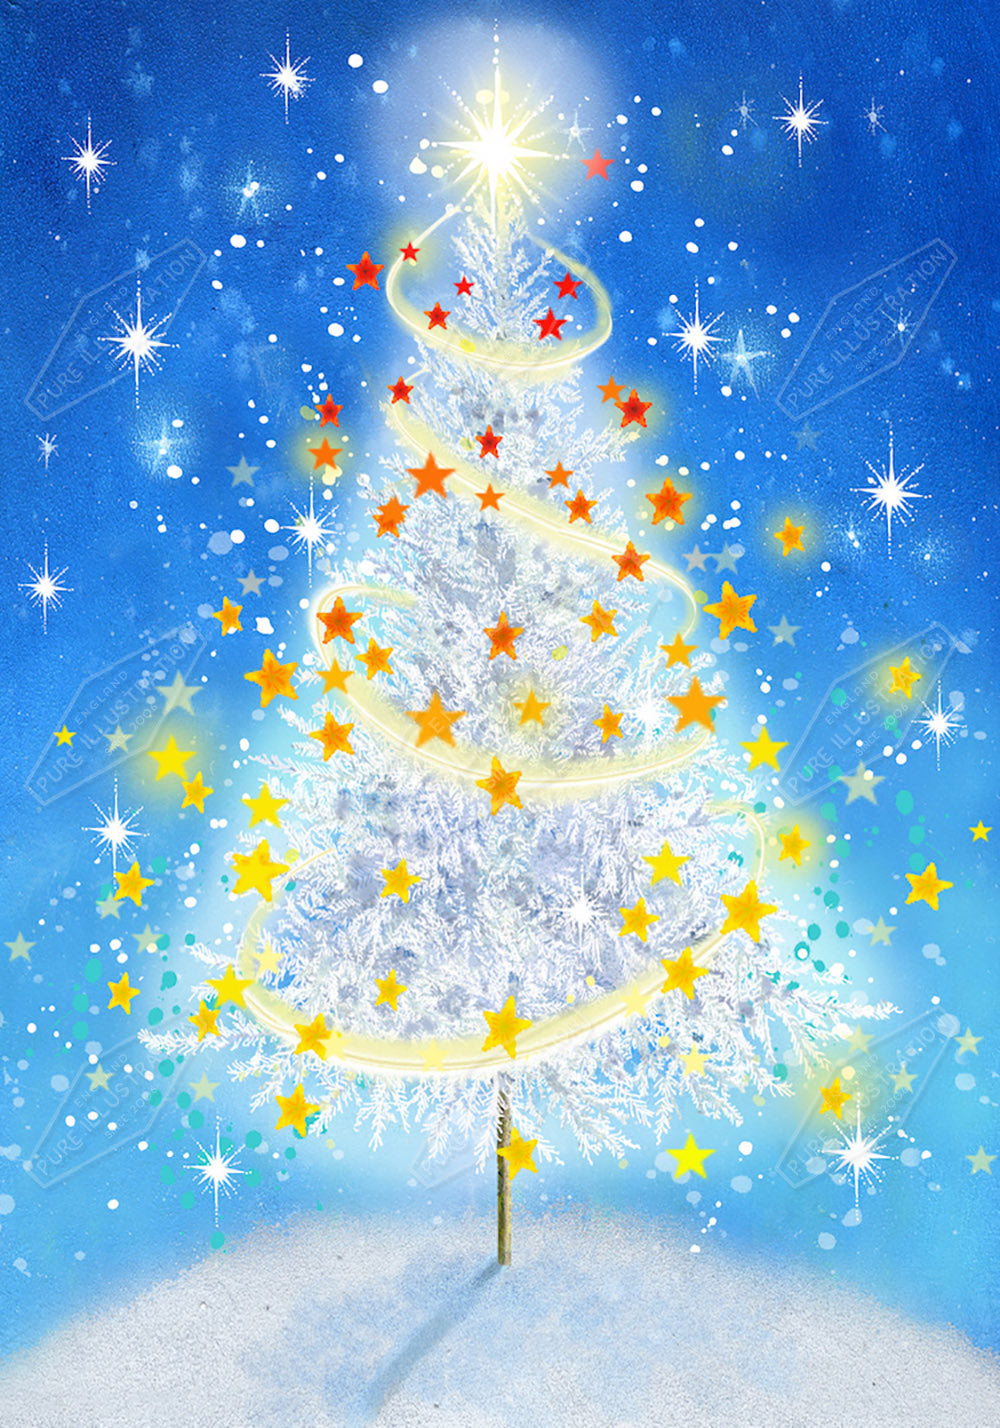 00029888JPA- Jan Pashley is represented by Pure Art Licensing Agency - Christmas Greeting Card Design